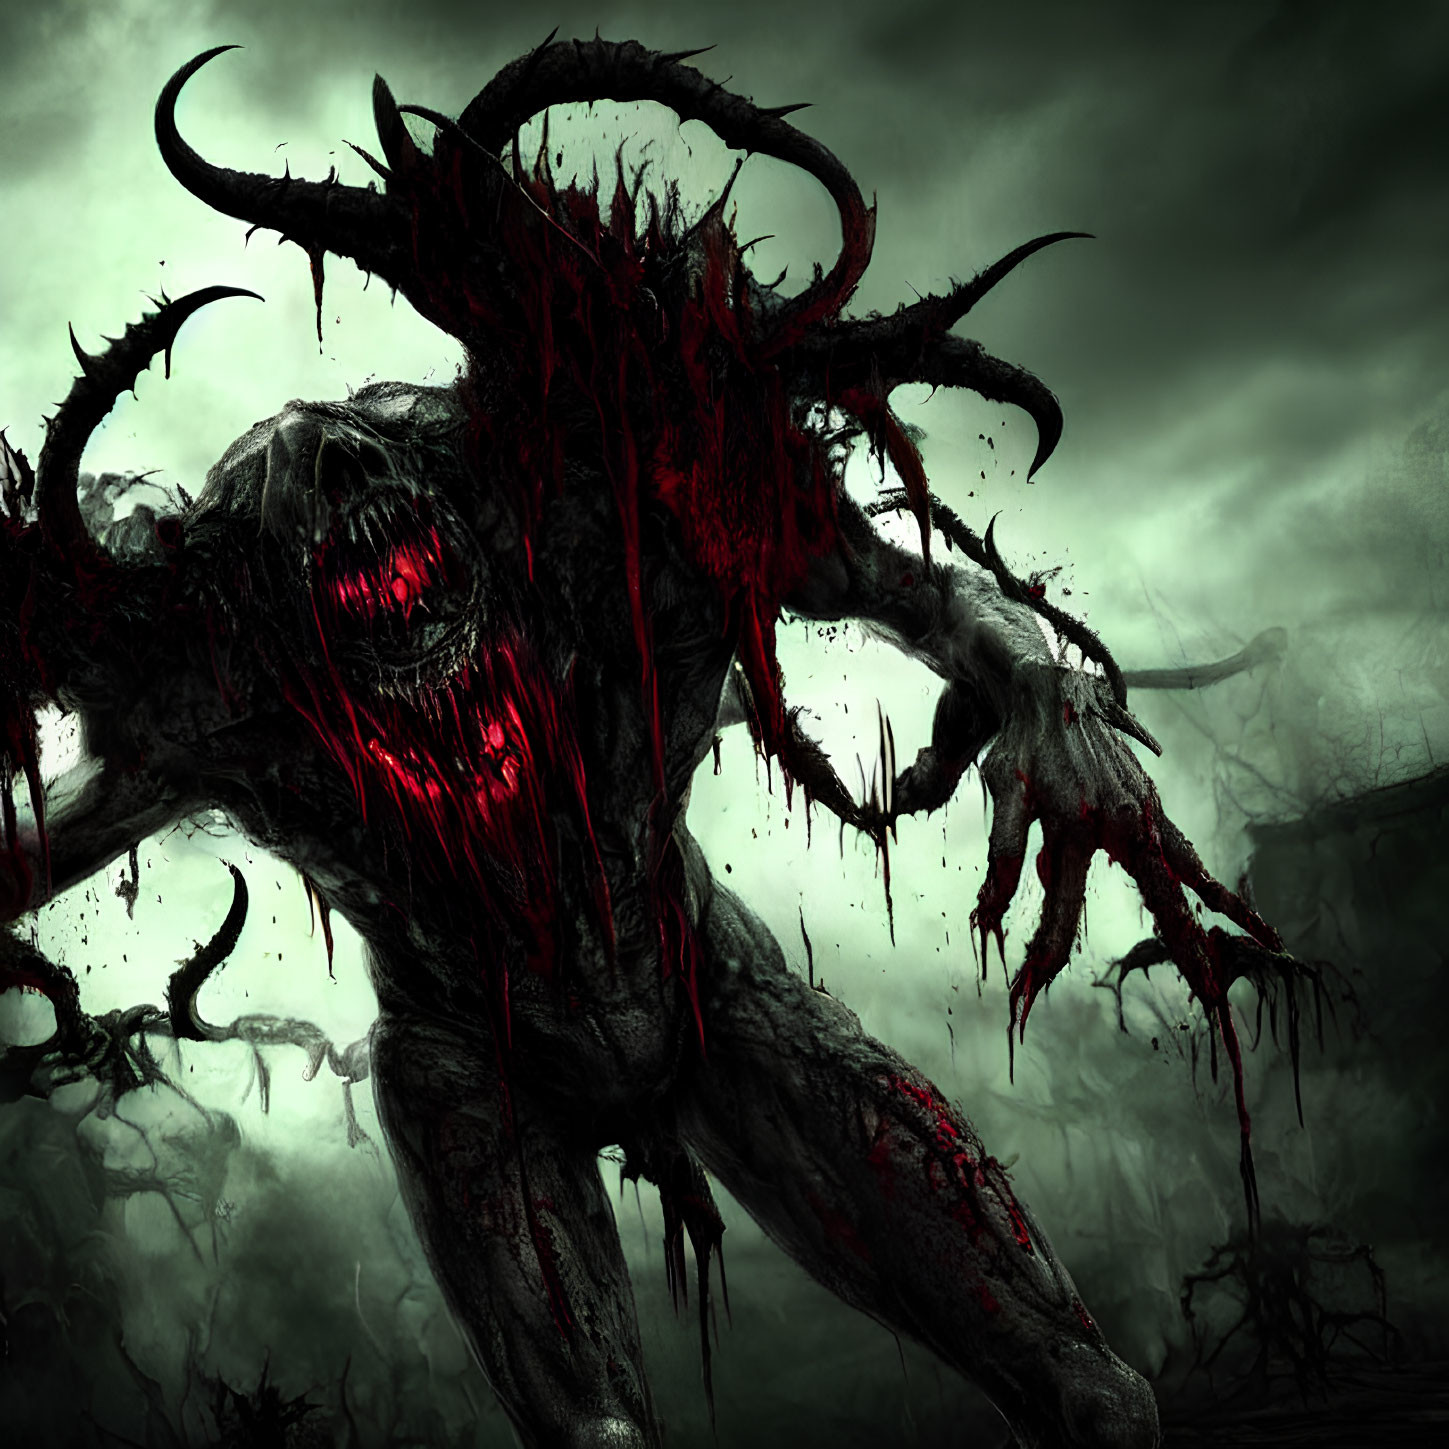 Sinister dark creature with glowing red eyes and sharp horns in eerie landscape